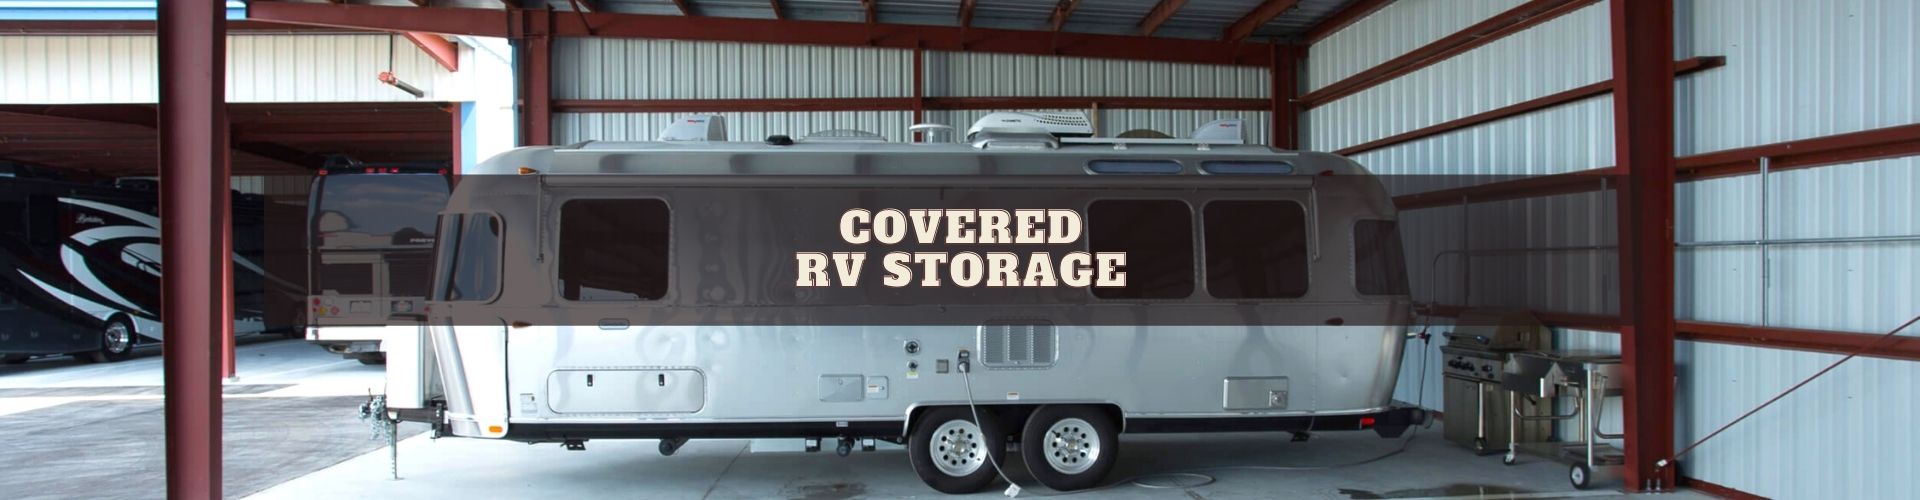 Covered RV storage Fort Myers FL